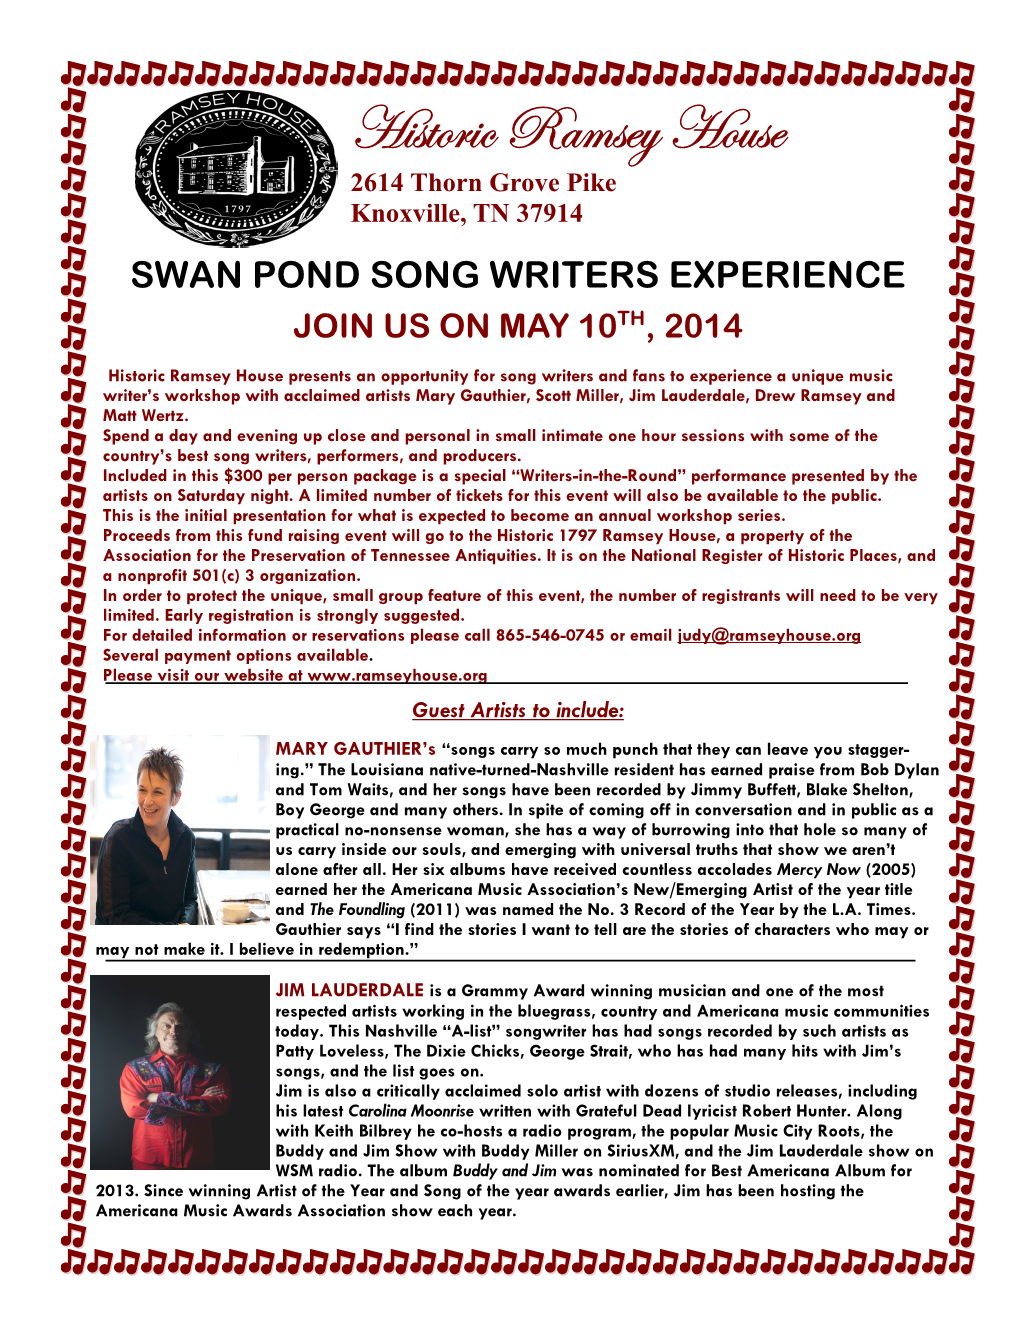 Swan Pond Song Writers Experience Join Us on May 10Th, 2014